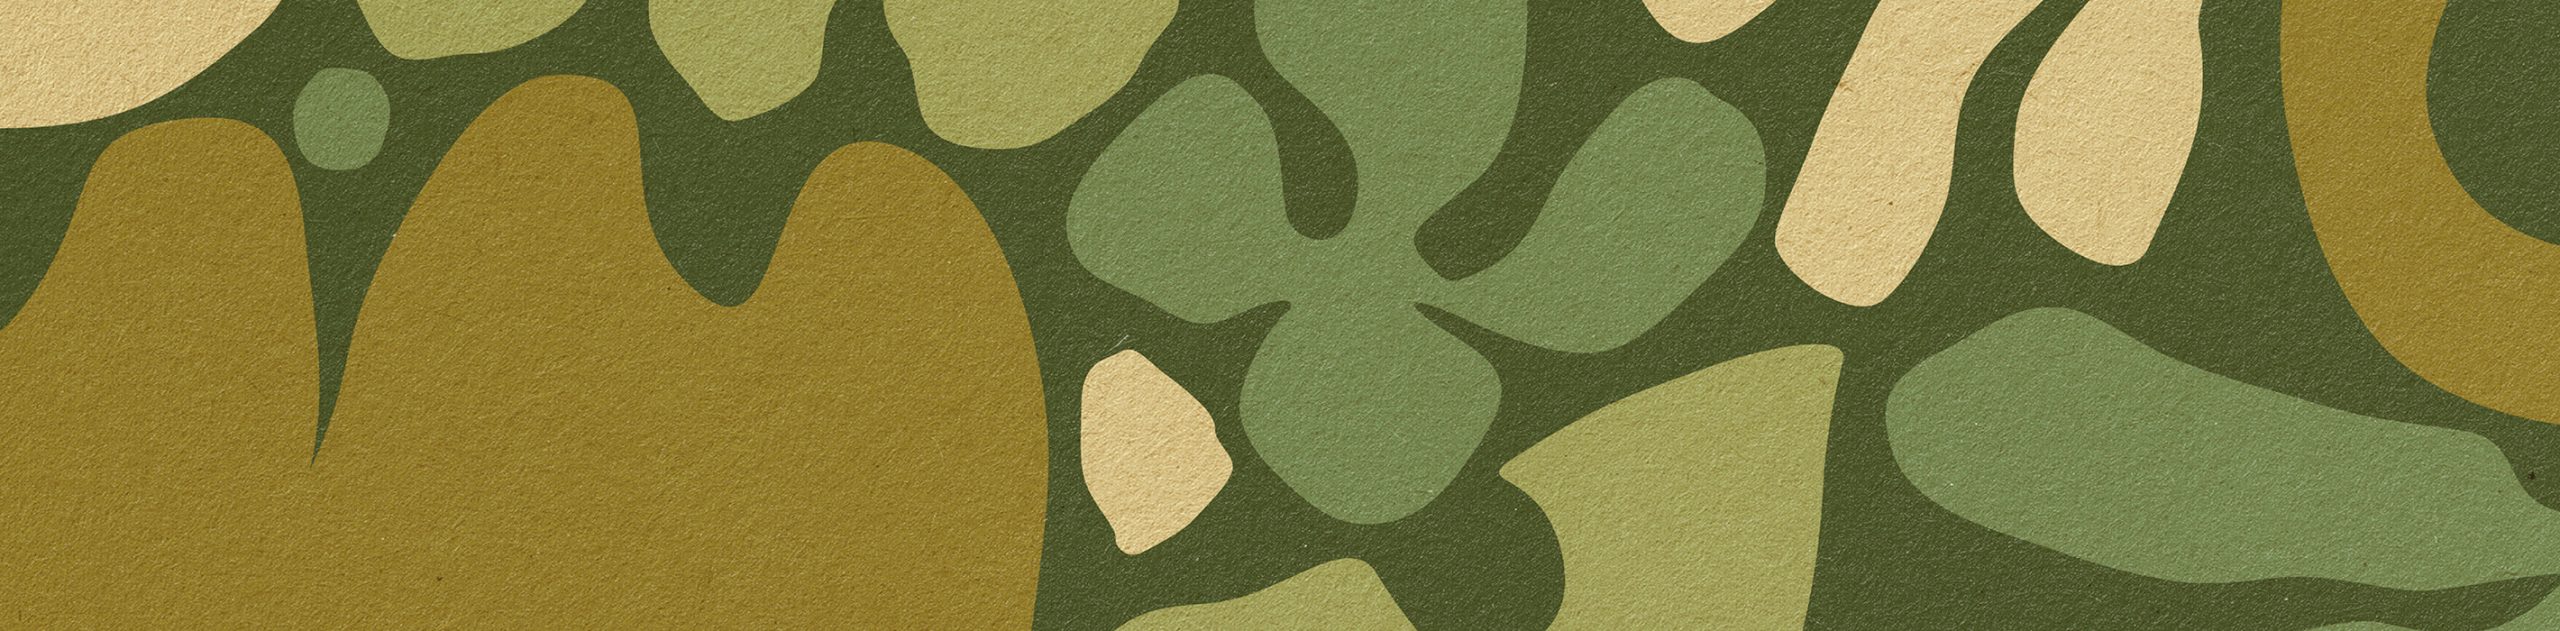 A khaki variation of The Boldest Co branded pattern, the blobby shapes being inspired by 1960s design.